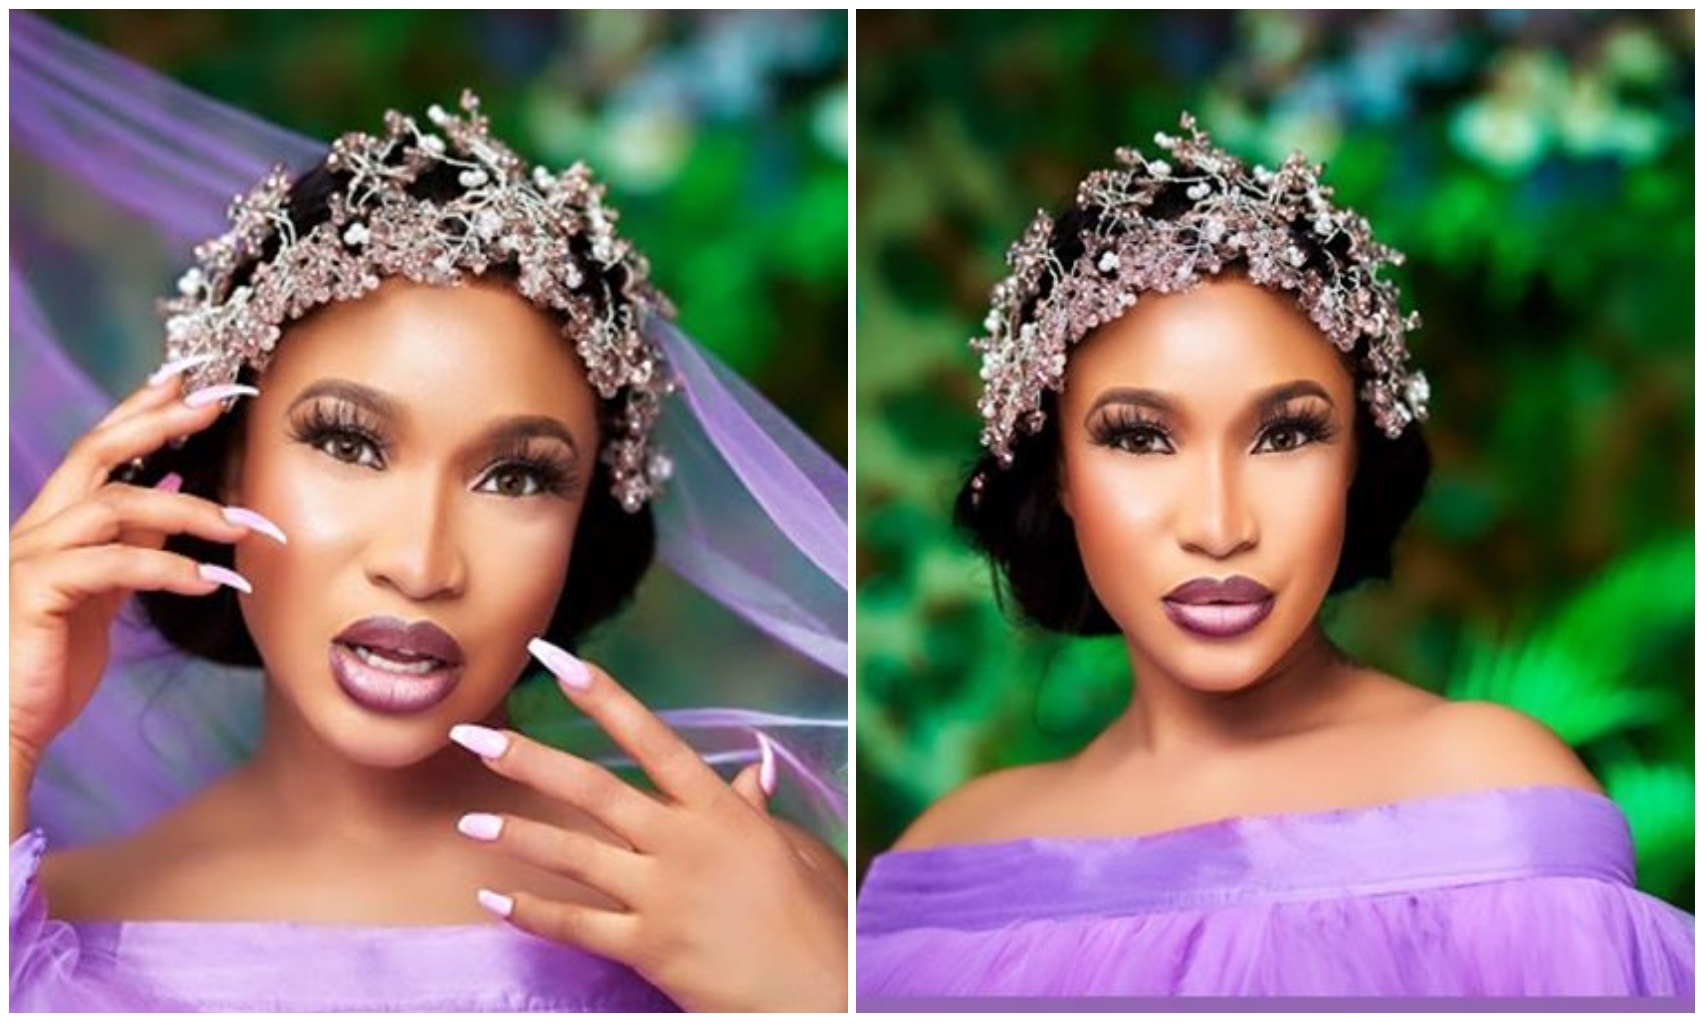 'I have been through hell and back' – Tonto Dikeh celebrates 35th birthday (Photos)